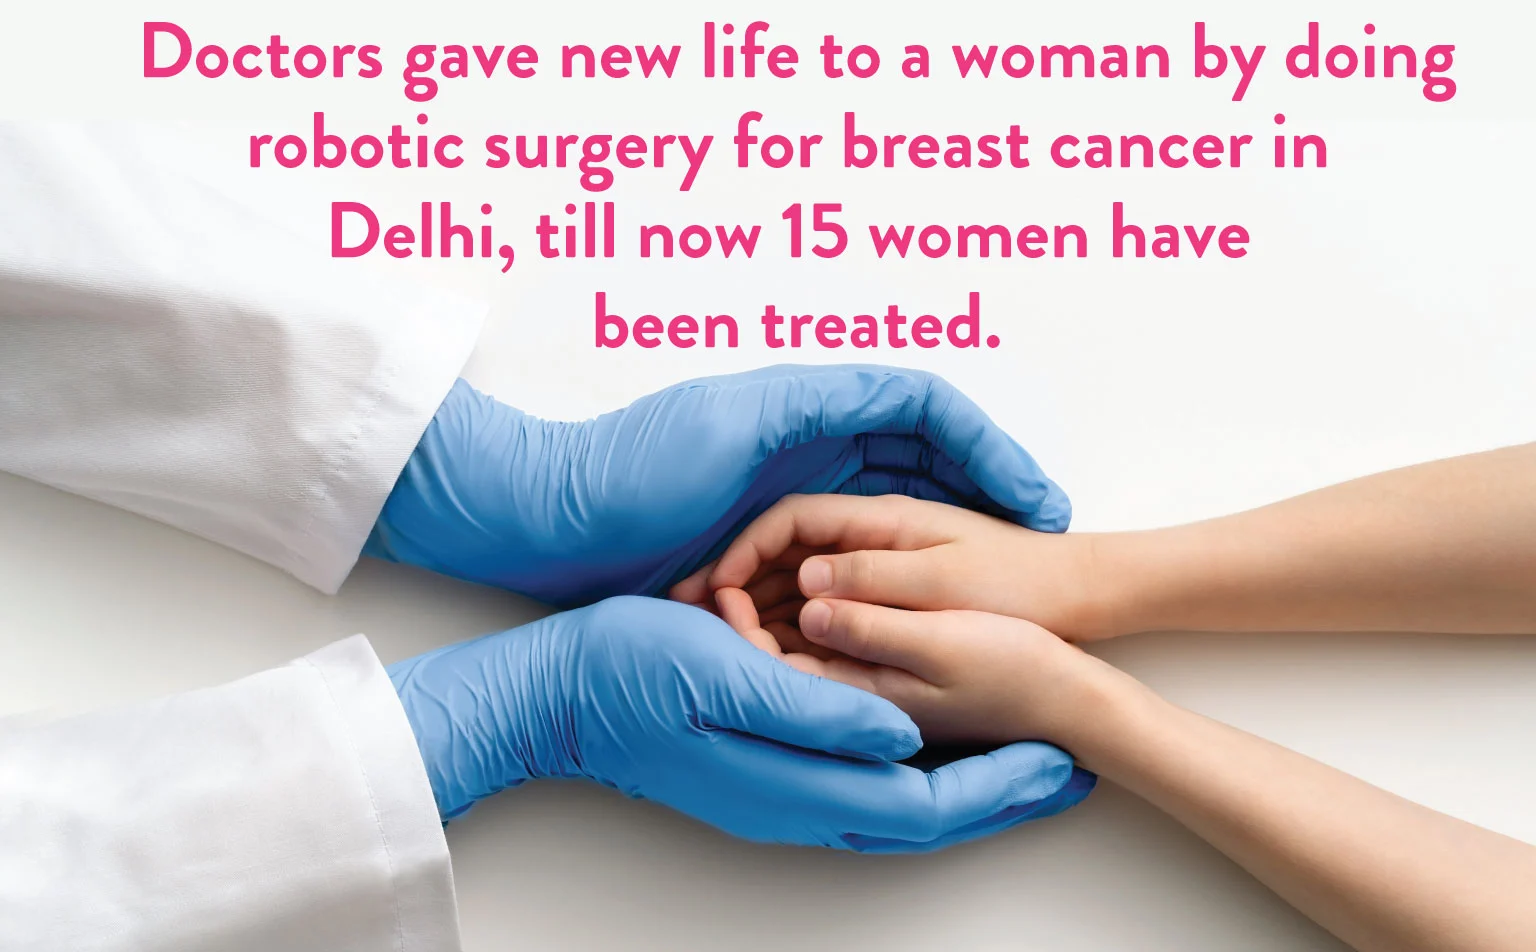 Robotic Breast Cancer Surgery Saves Woman’s Life in Delhi; 15 Treated